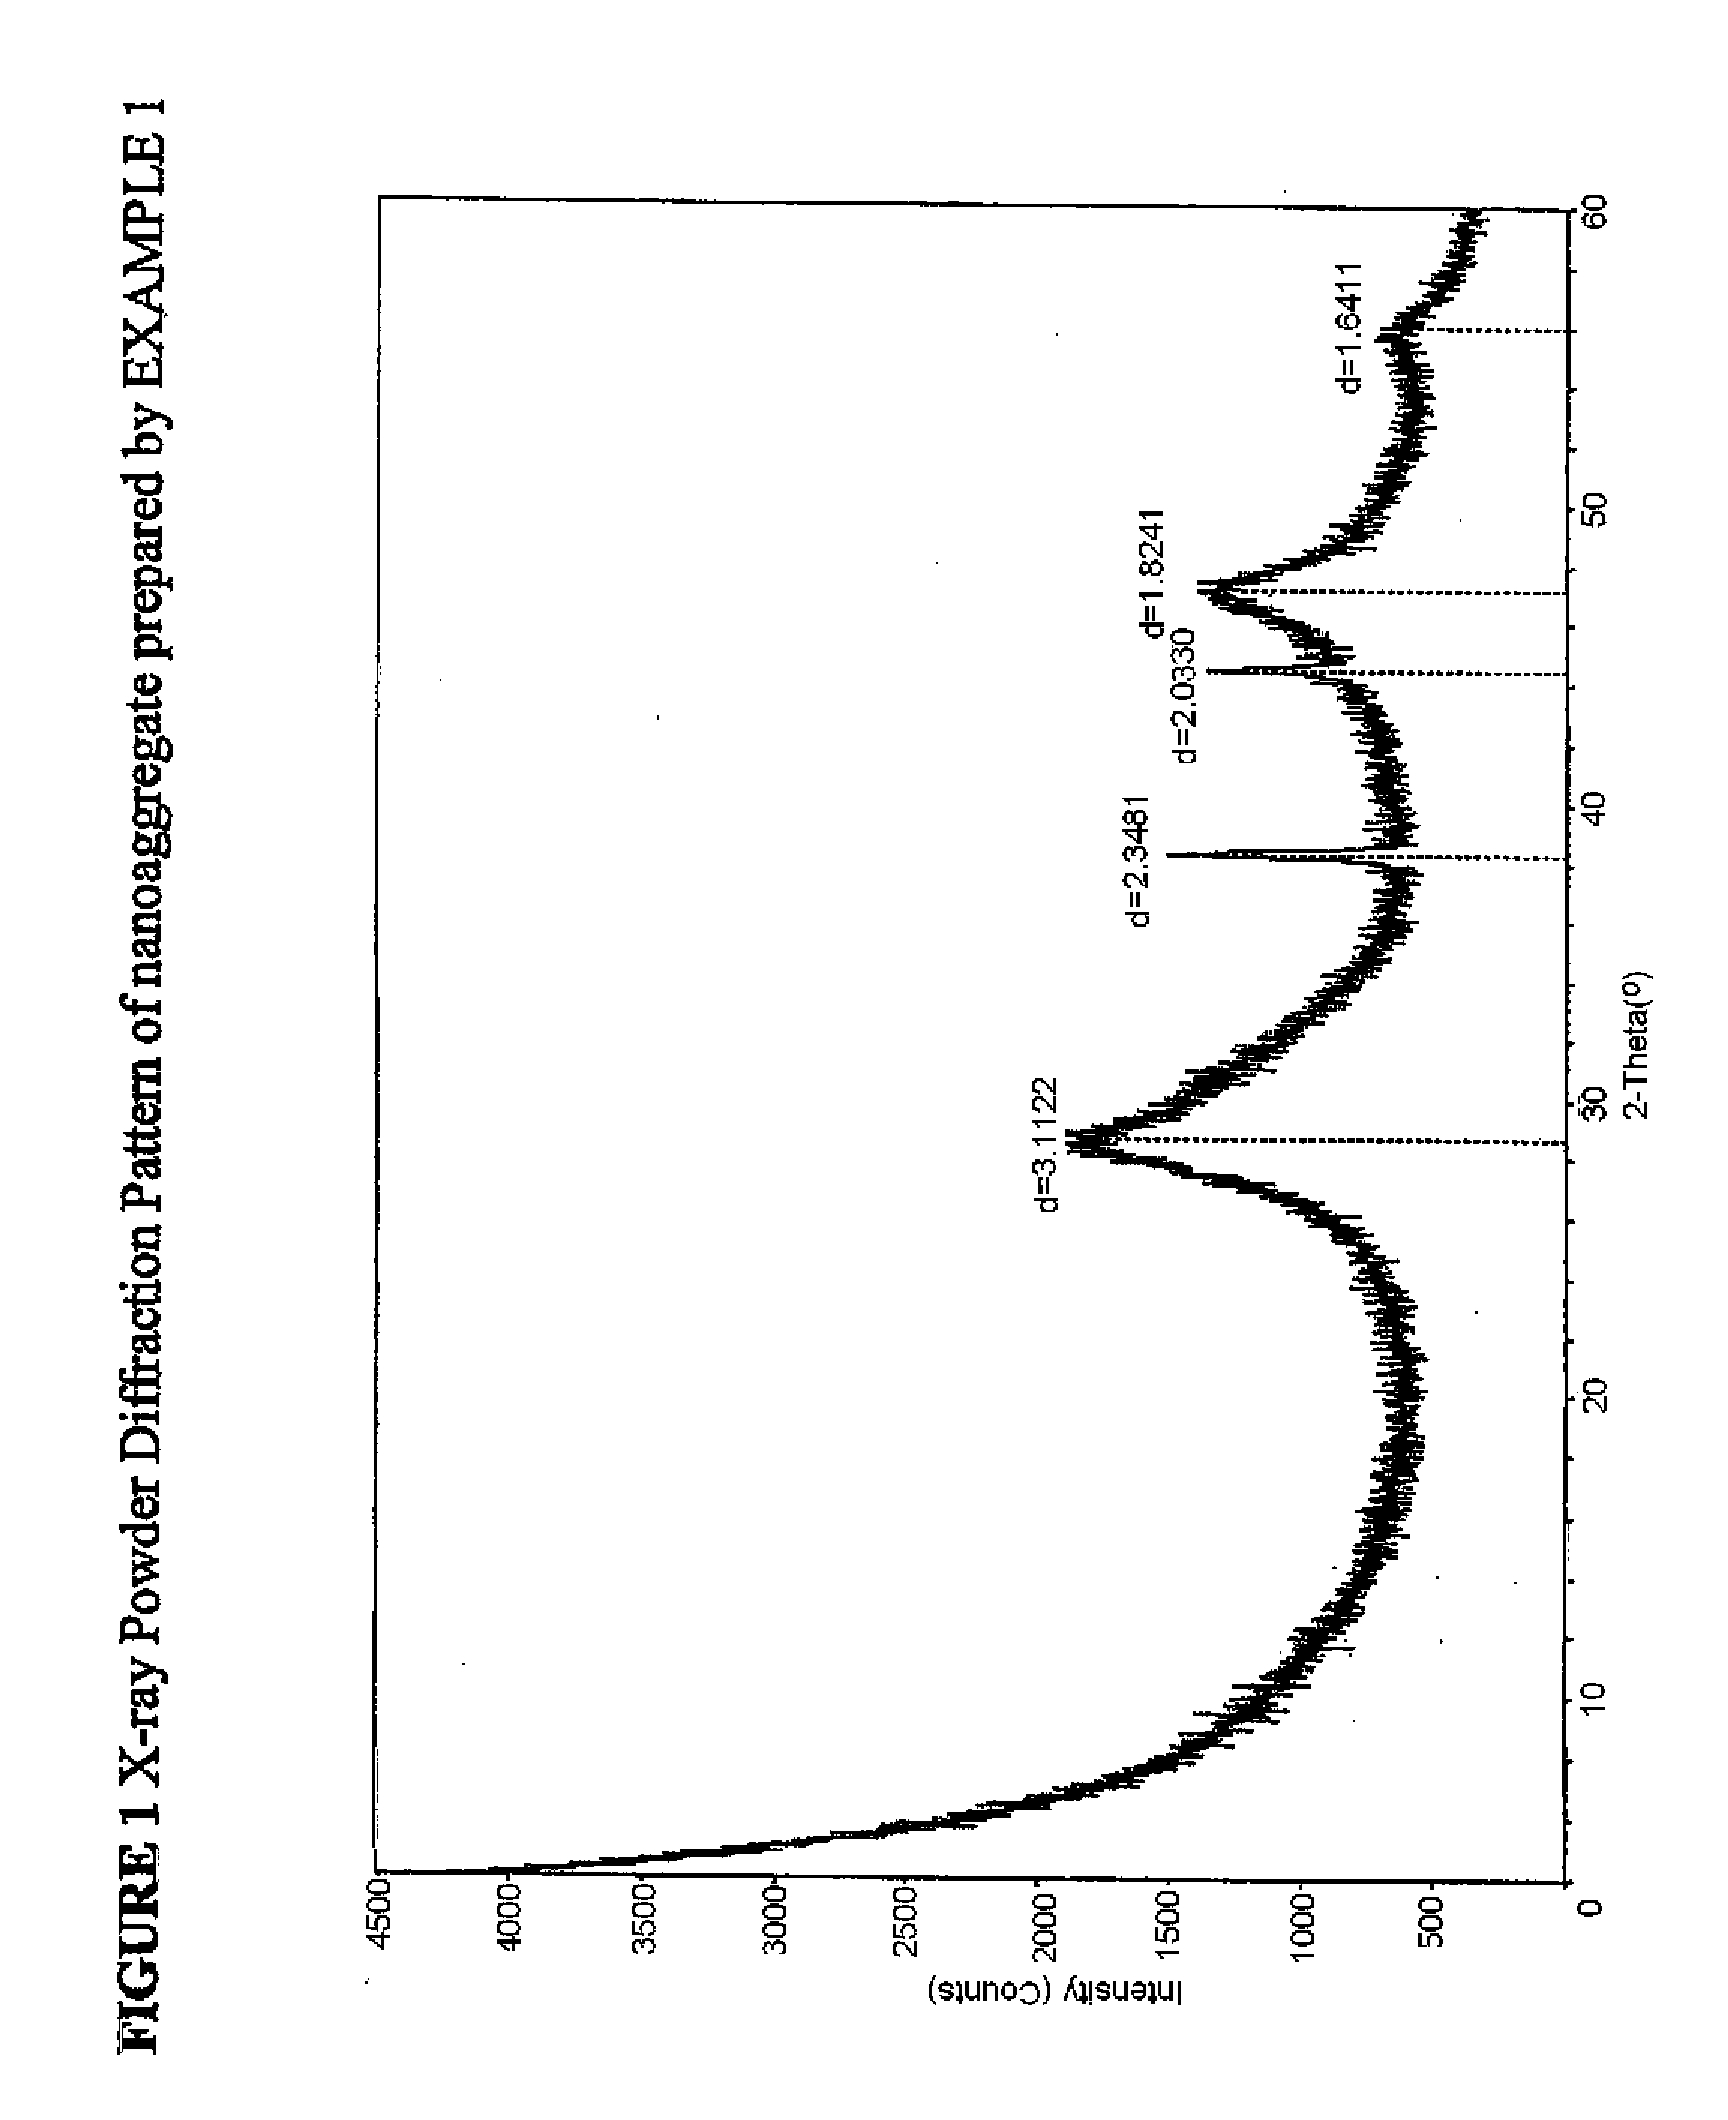 Tooth fluoridating and remineralizing compositions and methods, based on nanoaggregate formation